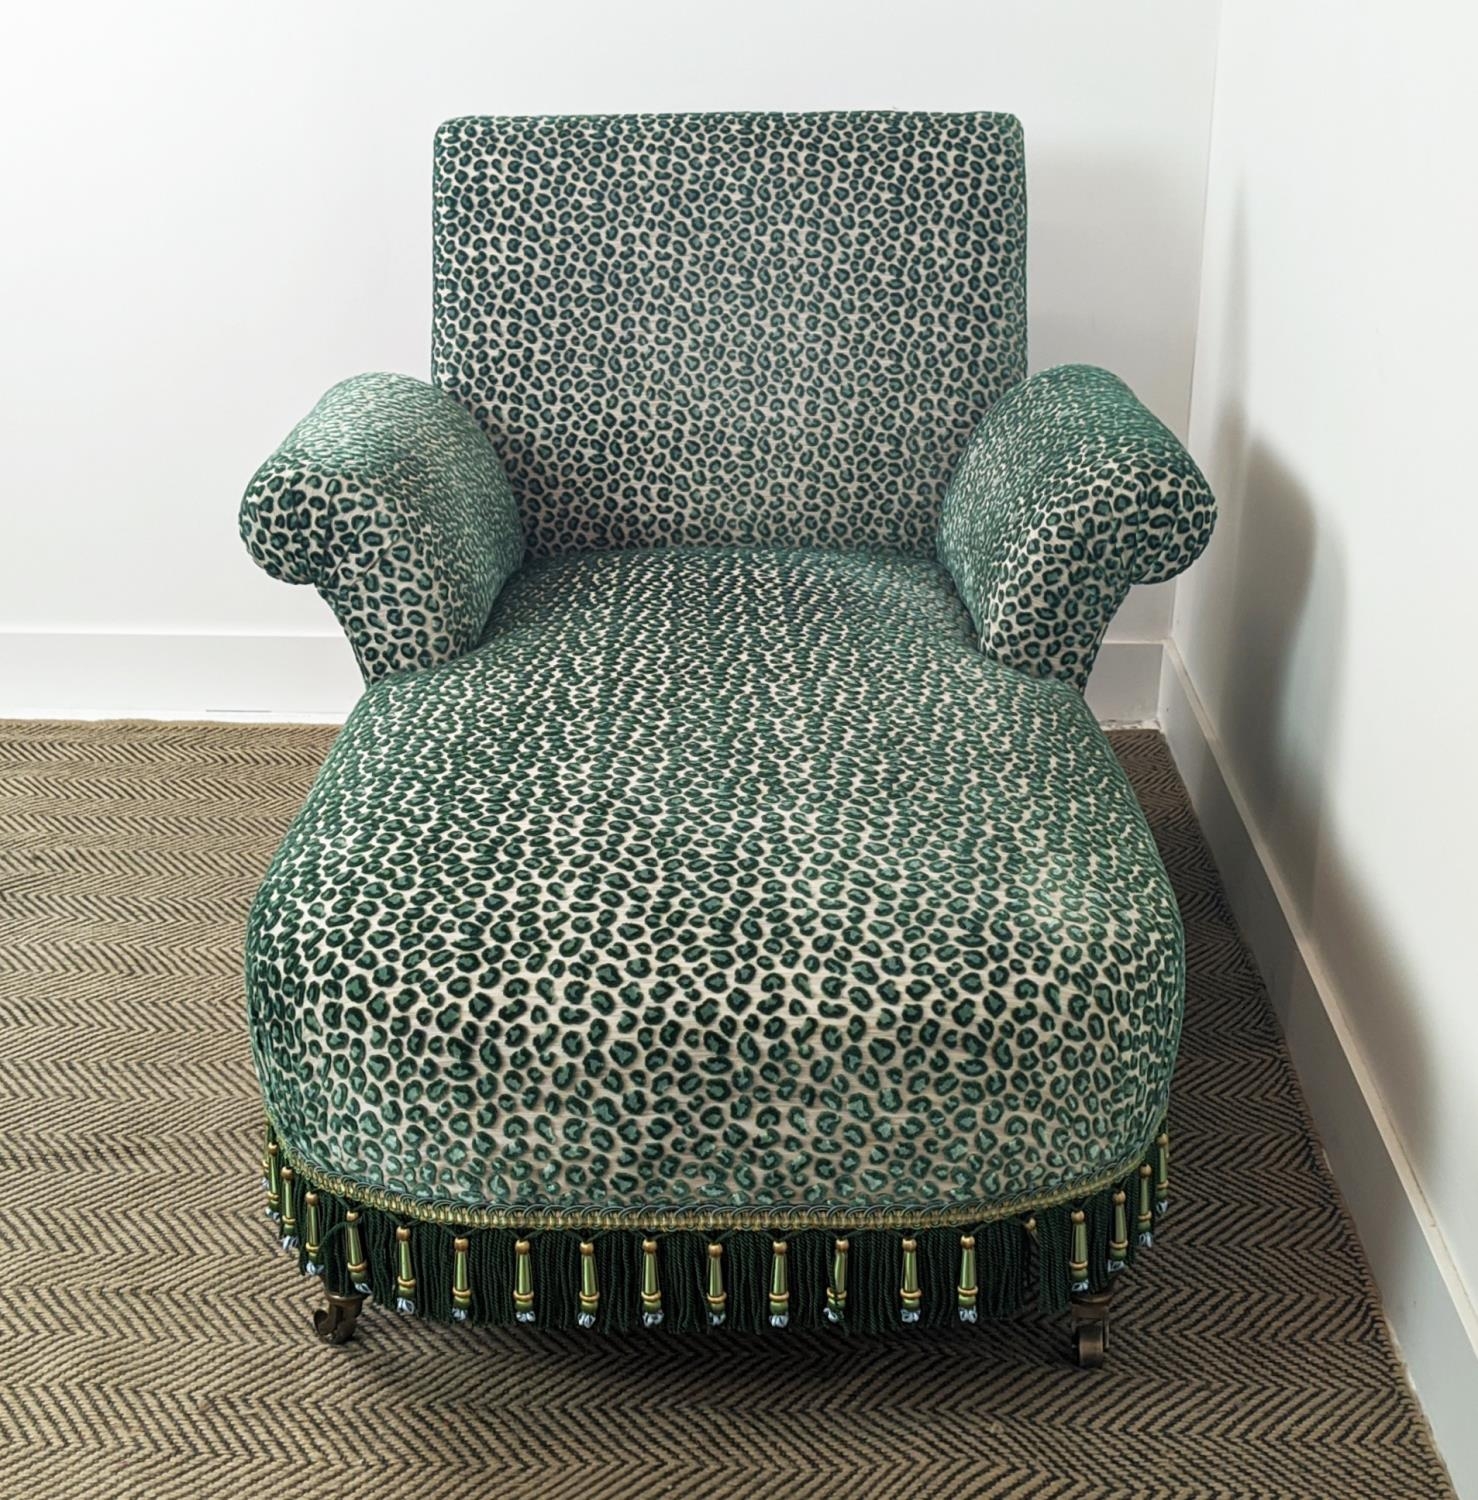 GEORGE SMITH BUTTERFLY CHAISE, leopard print cut velvet upholstery with bullion fringe, raised on - Image 3 of 6